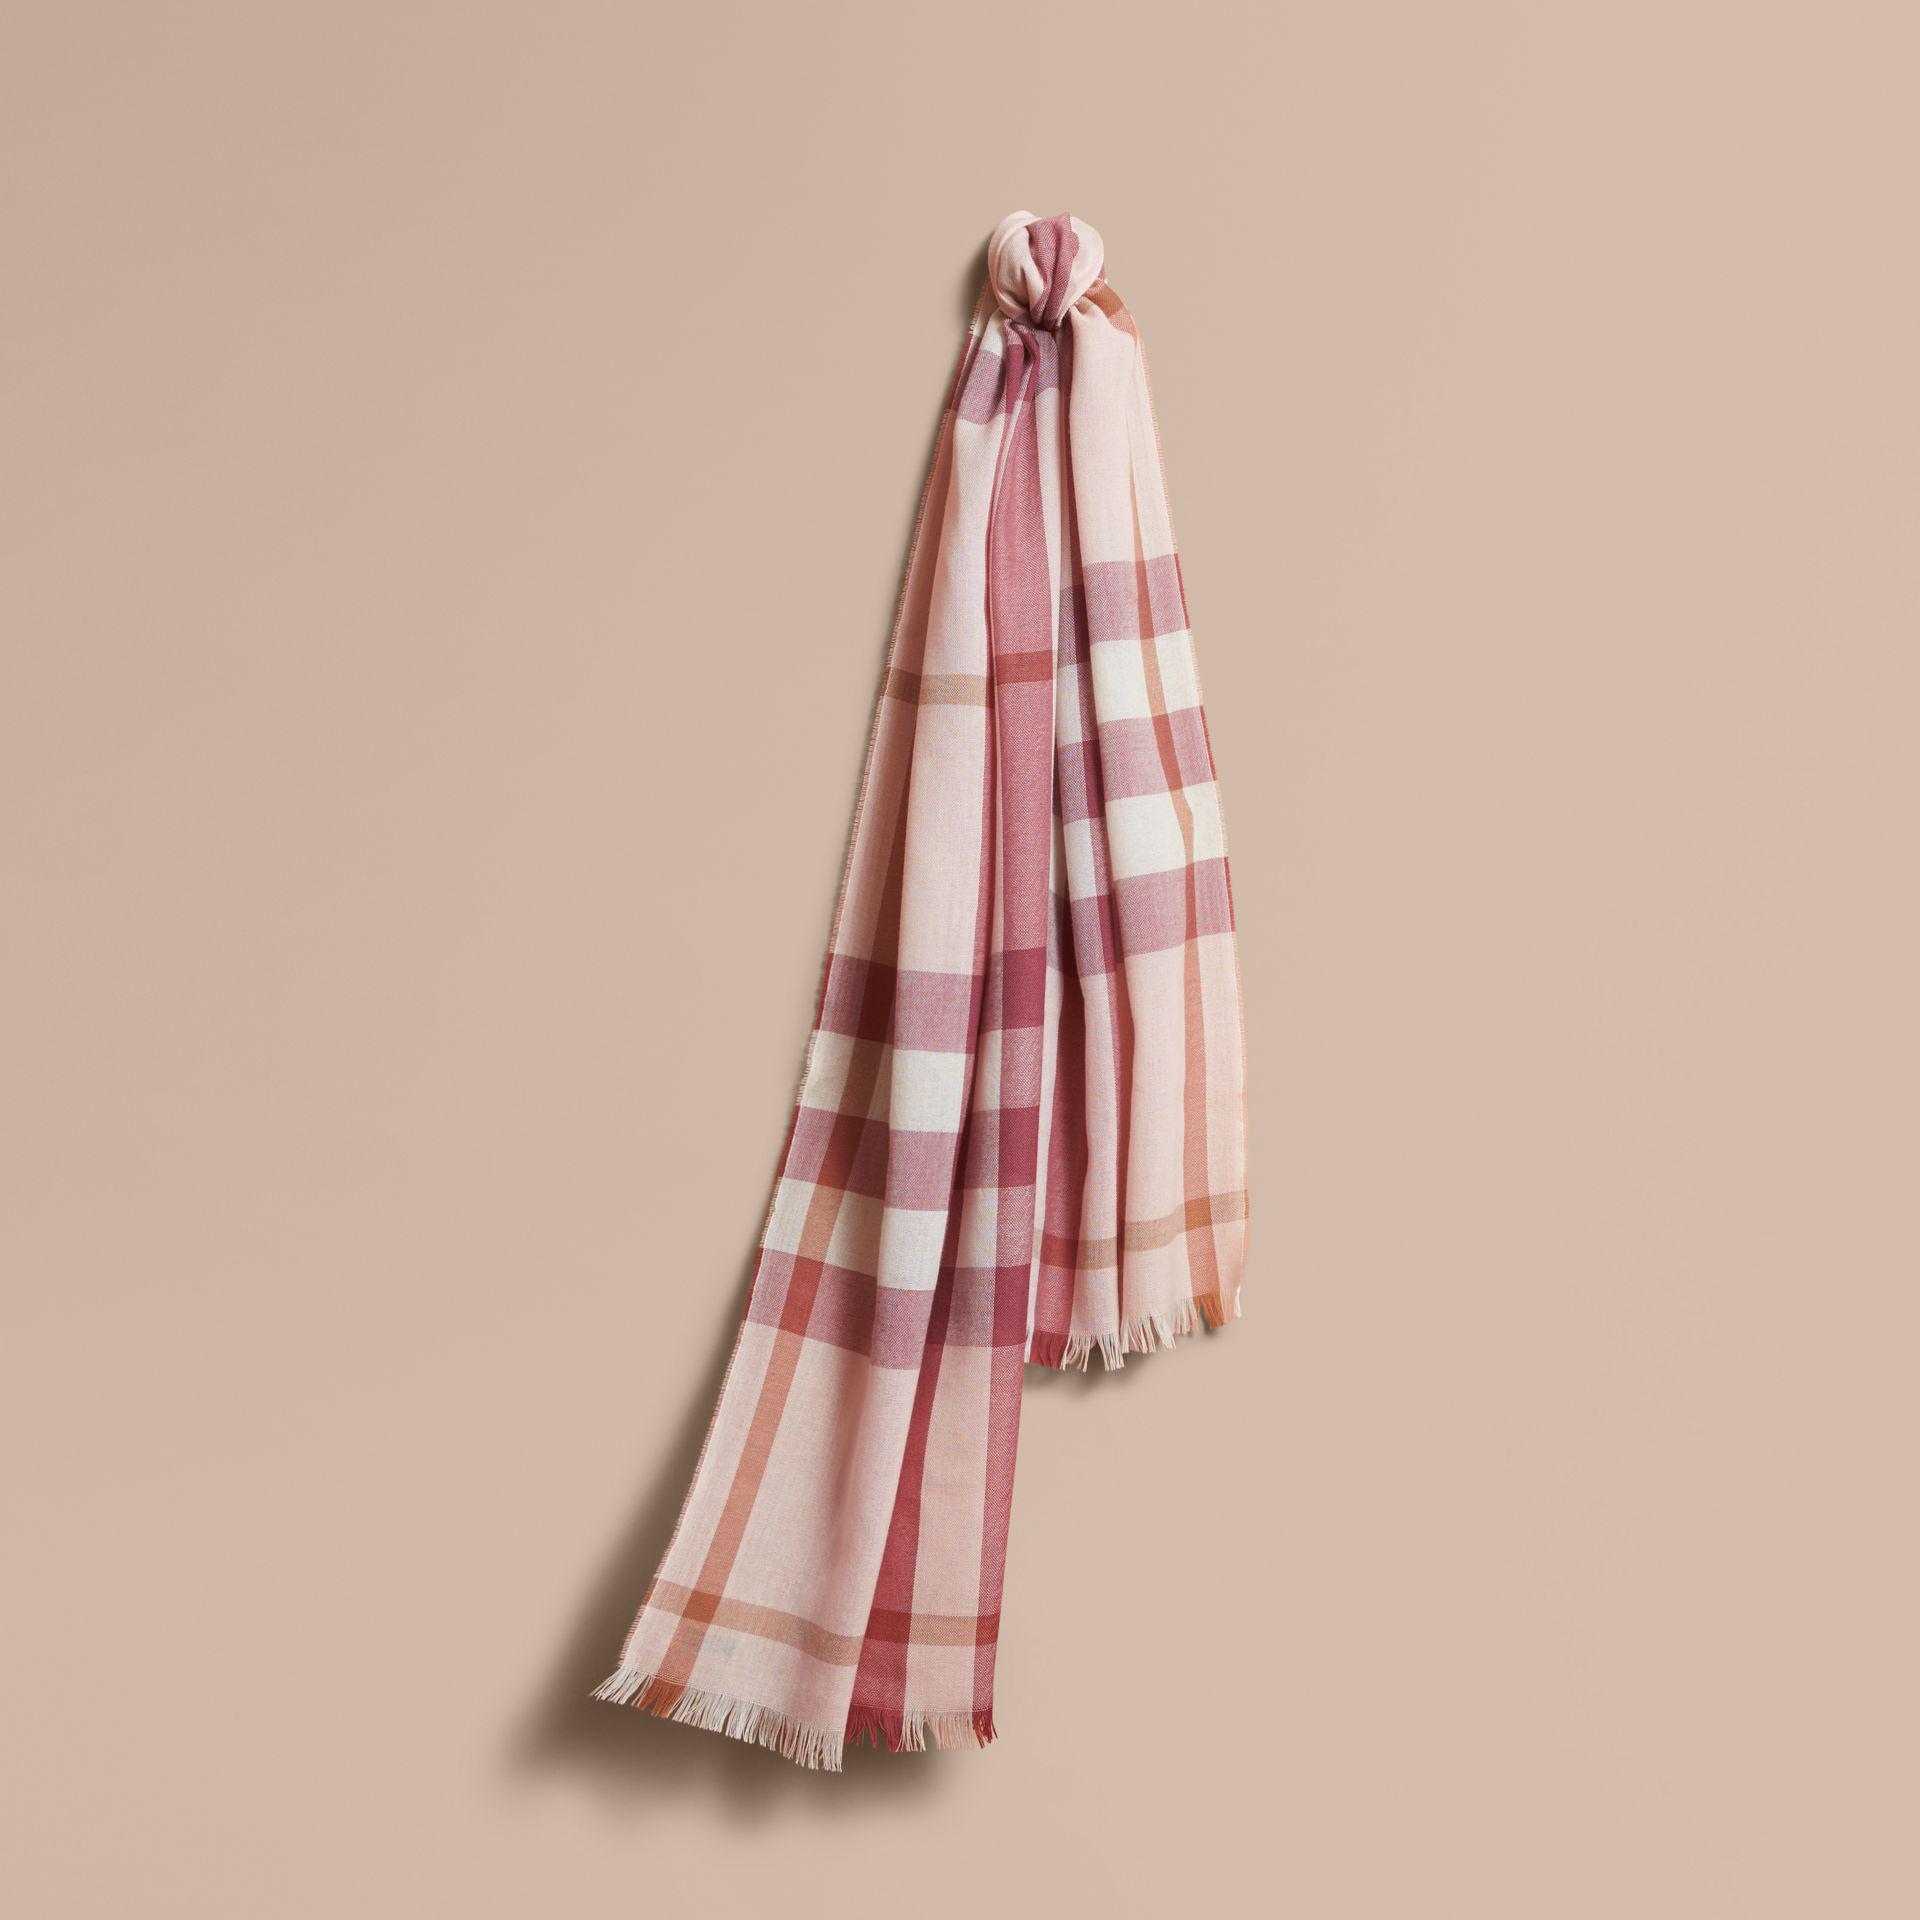 burberry lightweight check wool cashmere scarf